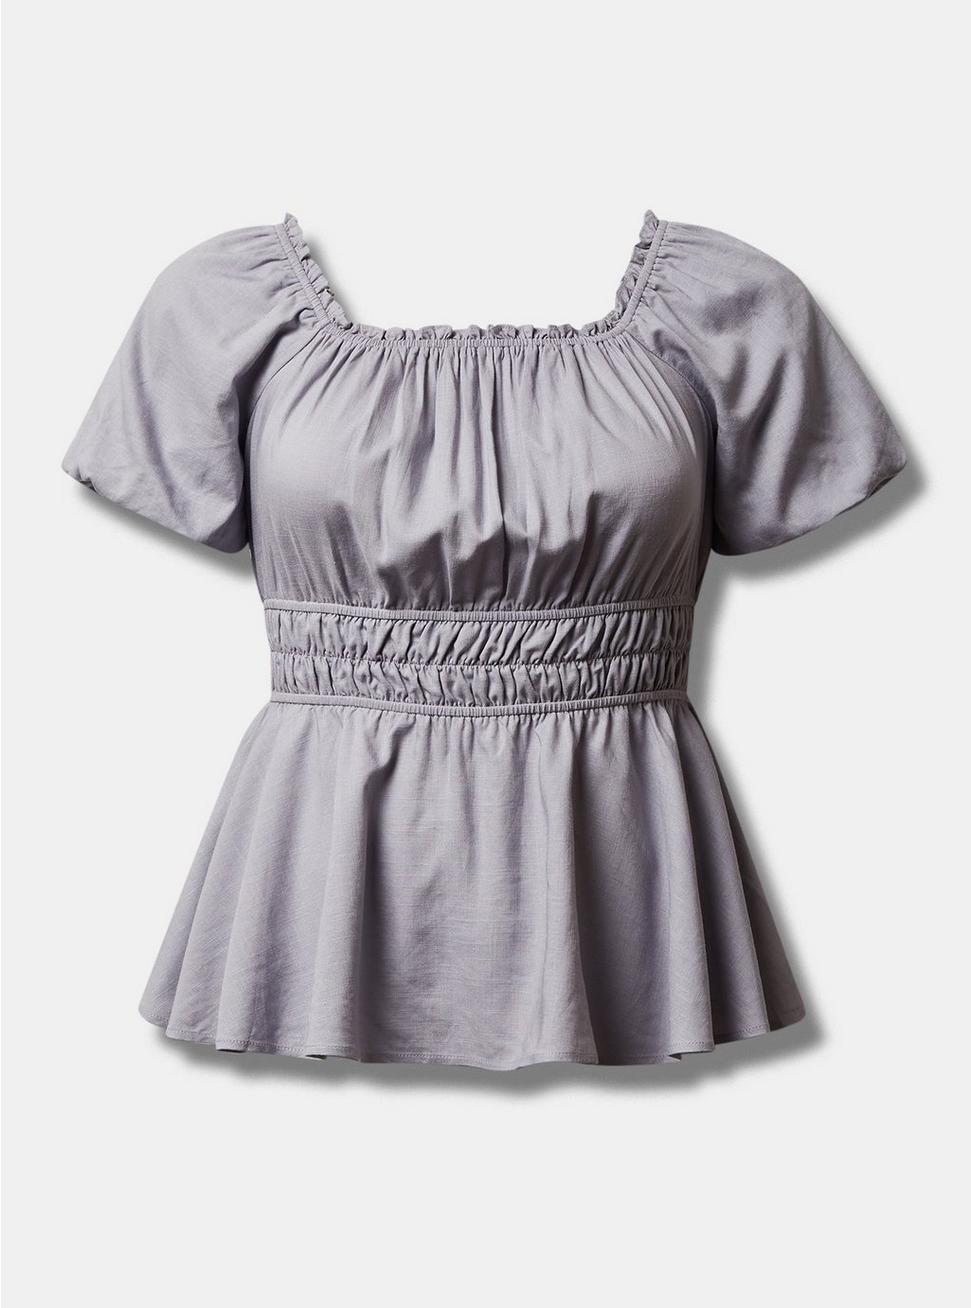 Linen Puff Sleeve Shirred Bodice Blouse, LILAC GRAY, hi-res